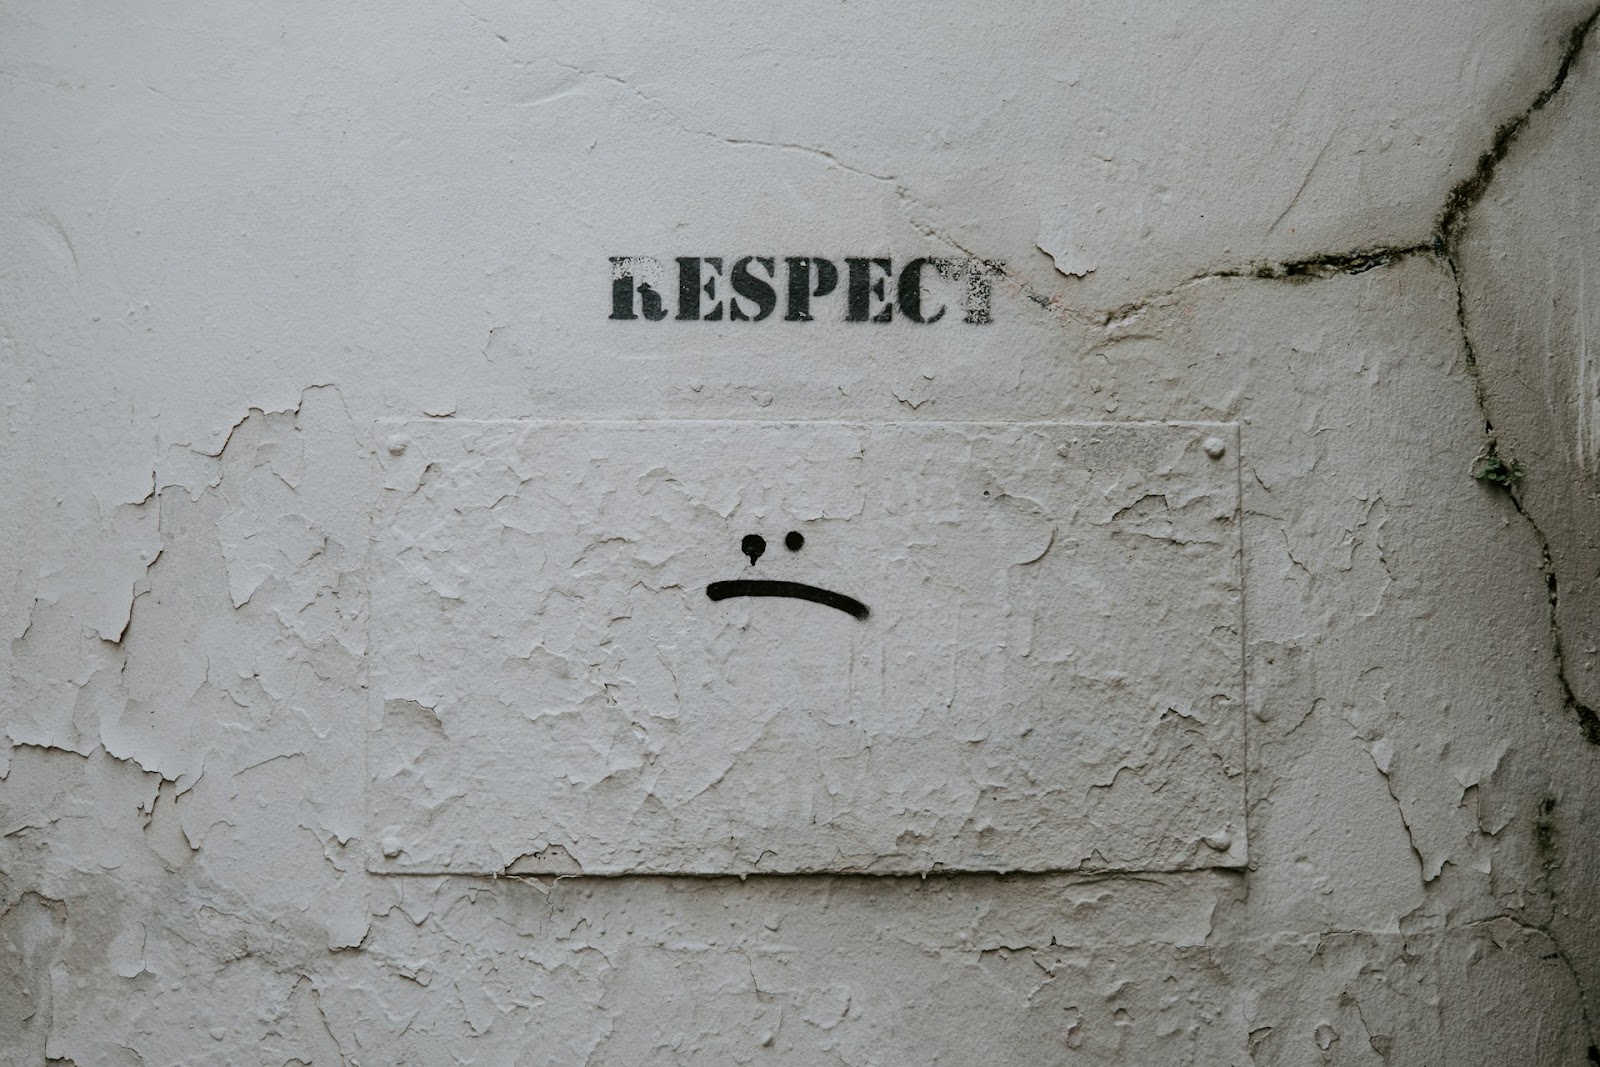 What is Respect?